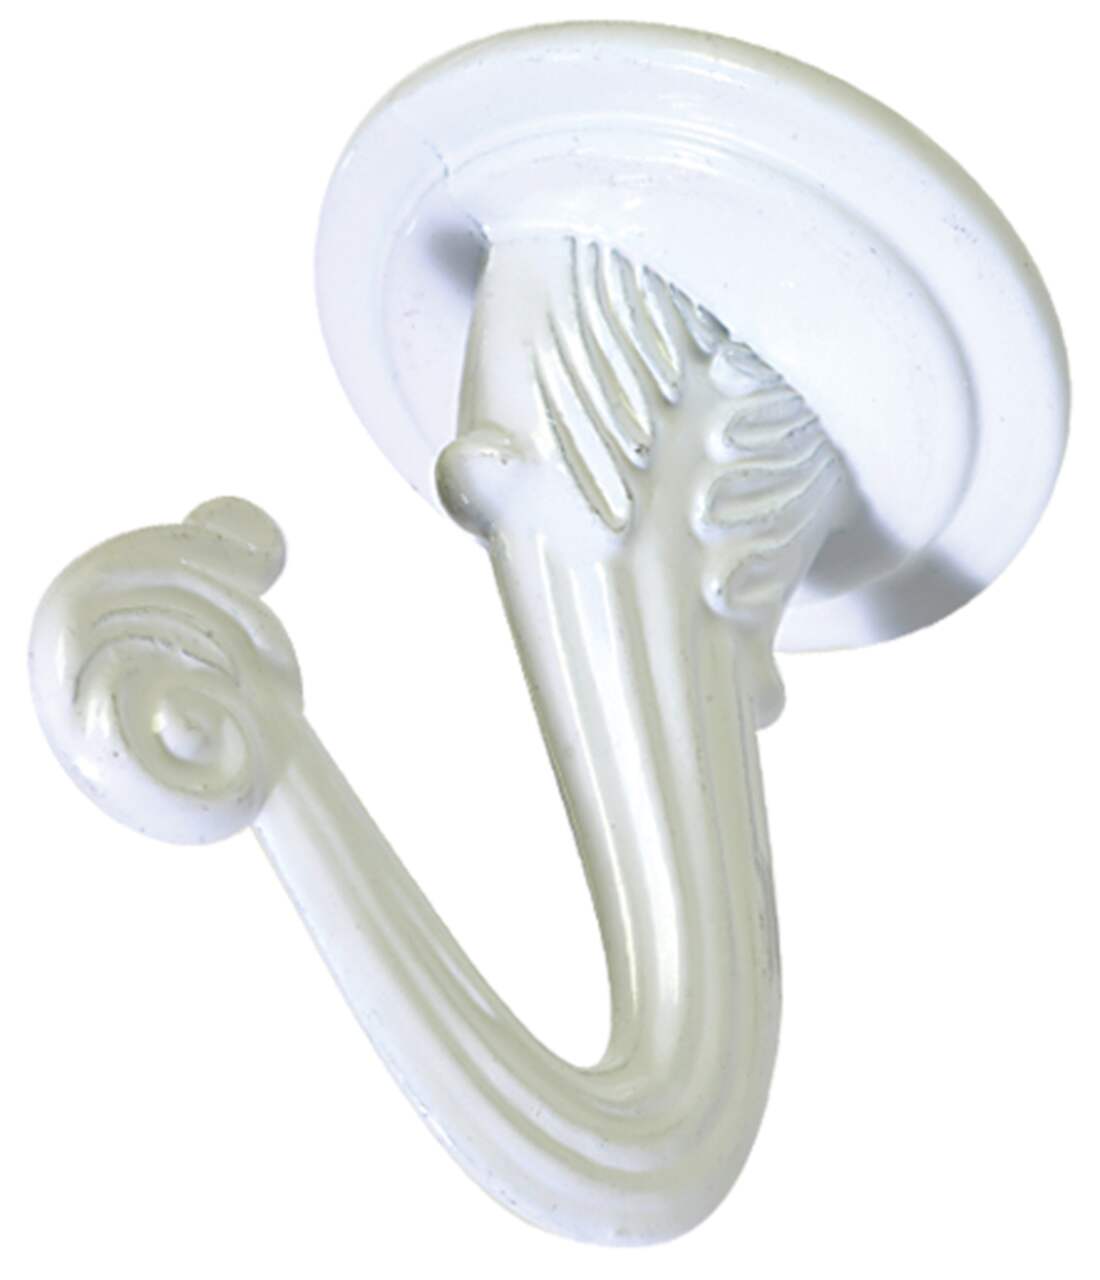 https://media-www.canadiantire.ca/product/fixing/hardware/general-hardware/1610726/white-swag-hooks-2-pack-eeac1669-f8e9-4a5e-9e37-2320df4f5201.png?imdensity=1&imwidth=640&impolicy=mZoom